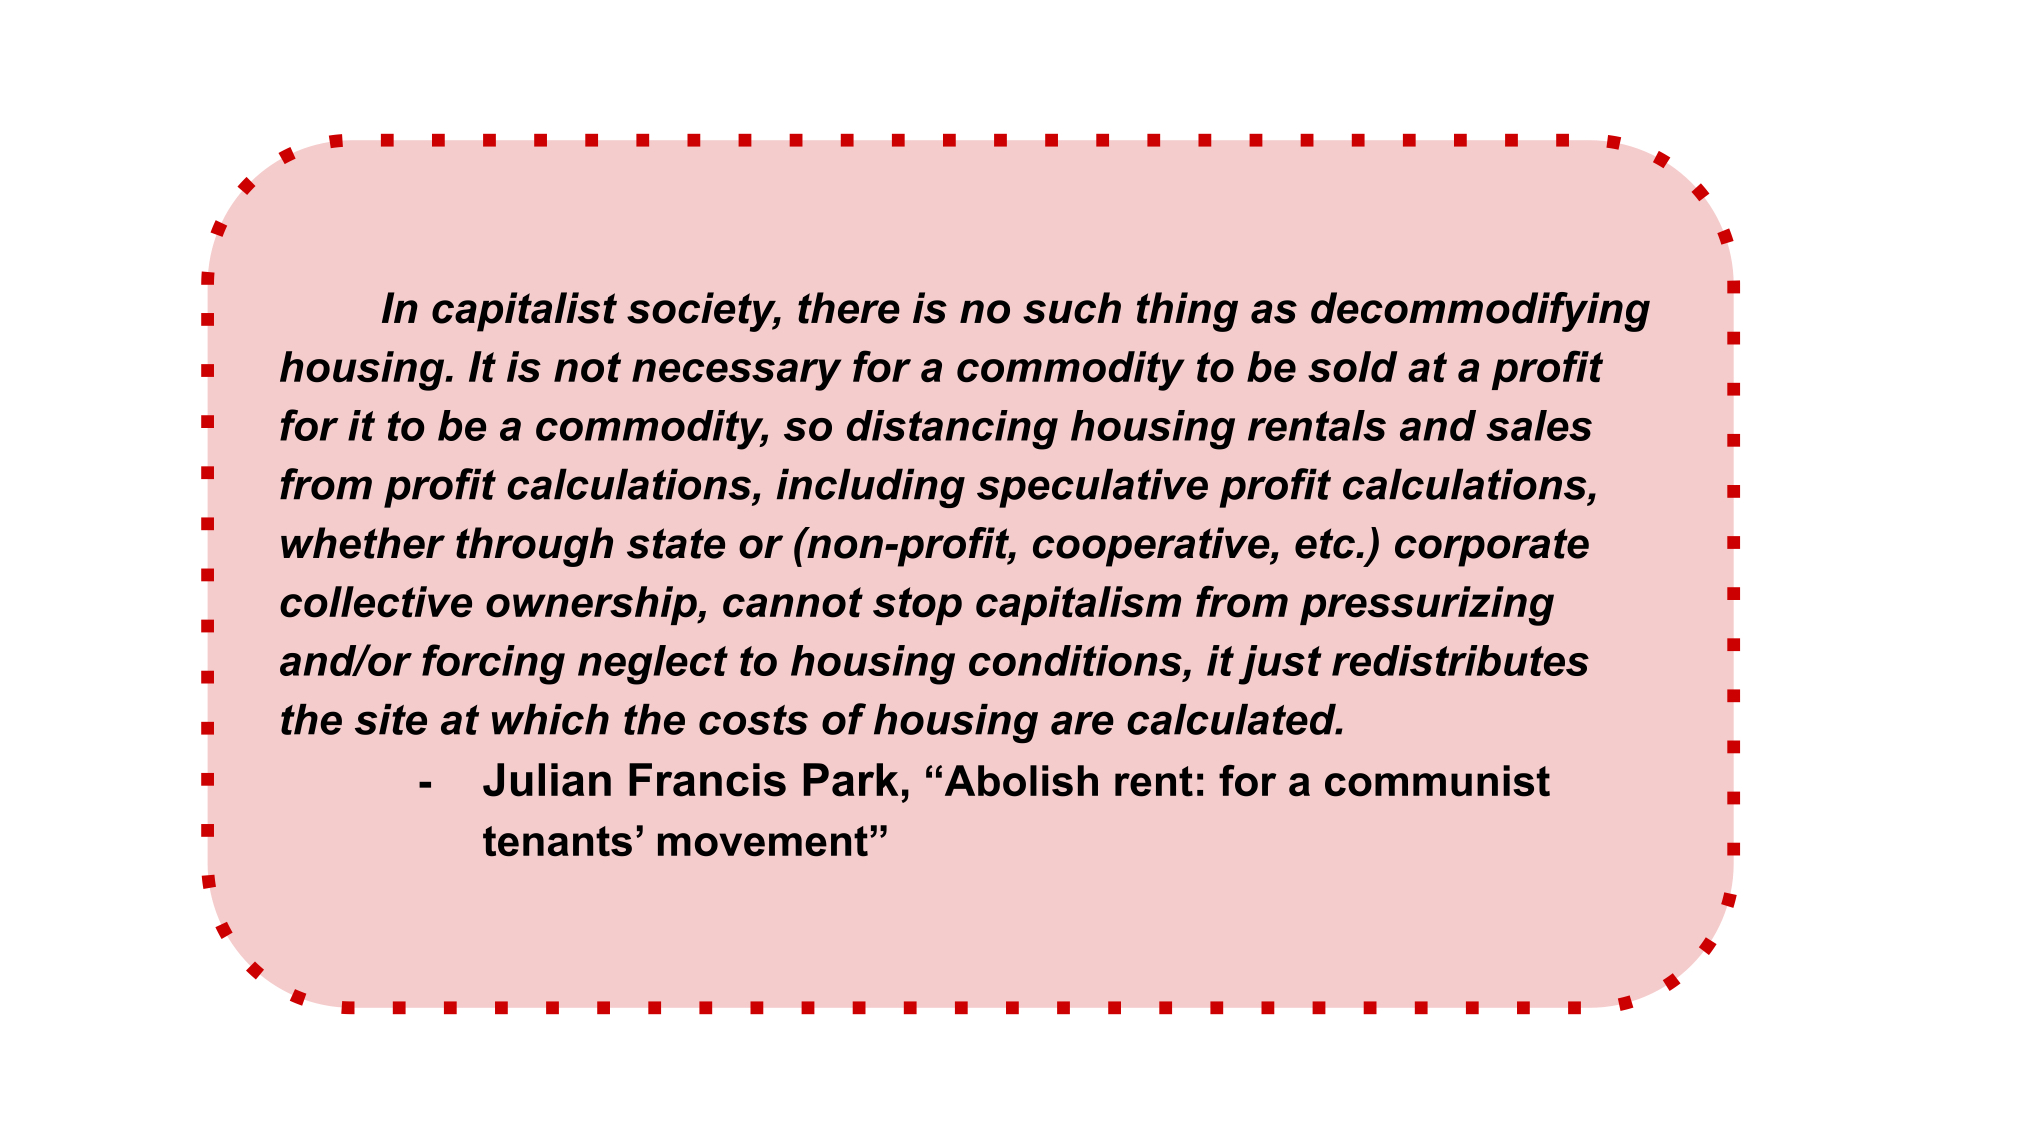 In capitalist society, there is no such thing as decommodifying housing. It is not necessary for a commodity to be sold at a profit for it to be a commodity, so distancing housing rentals and sales from profit calculations, including speculative profit calculations, whether through state or (non-profit, cooperative, etc.) corporate collective ownership, cannot stop capitalism from pressurizing and/or forcing neglect to housing conditions, it just redistributes the site at which the costs of housing are calculated. Julian Francis Park, “Abolish rent: for a communist tenants’ movement” - 